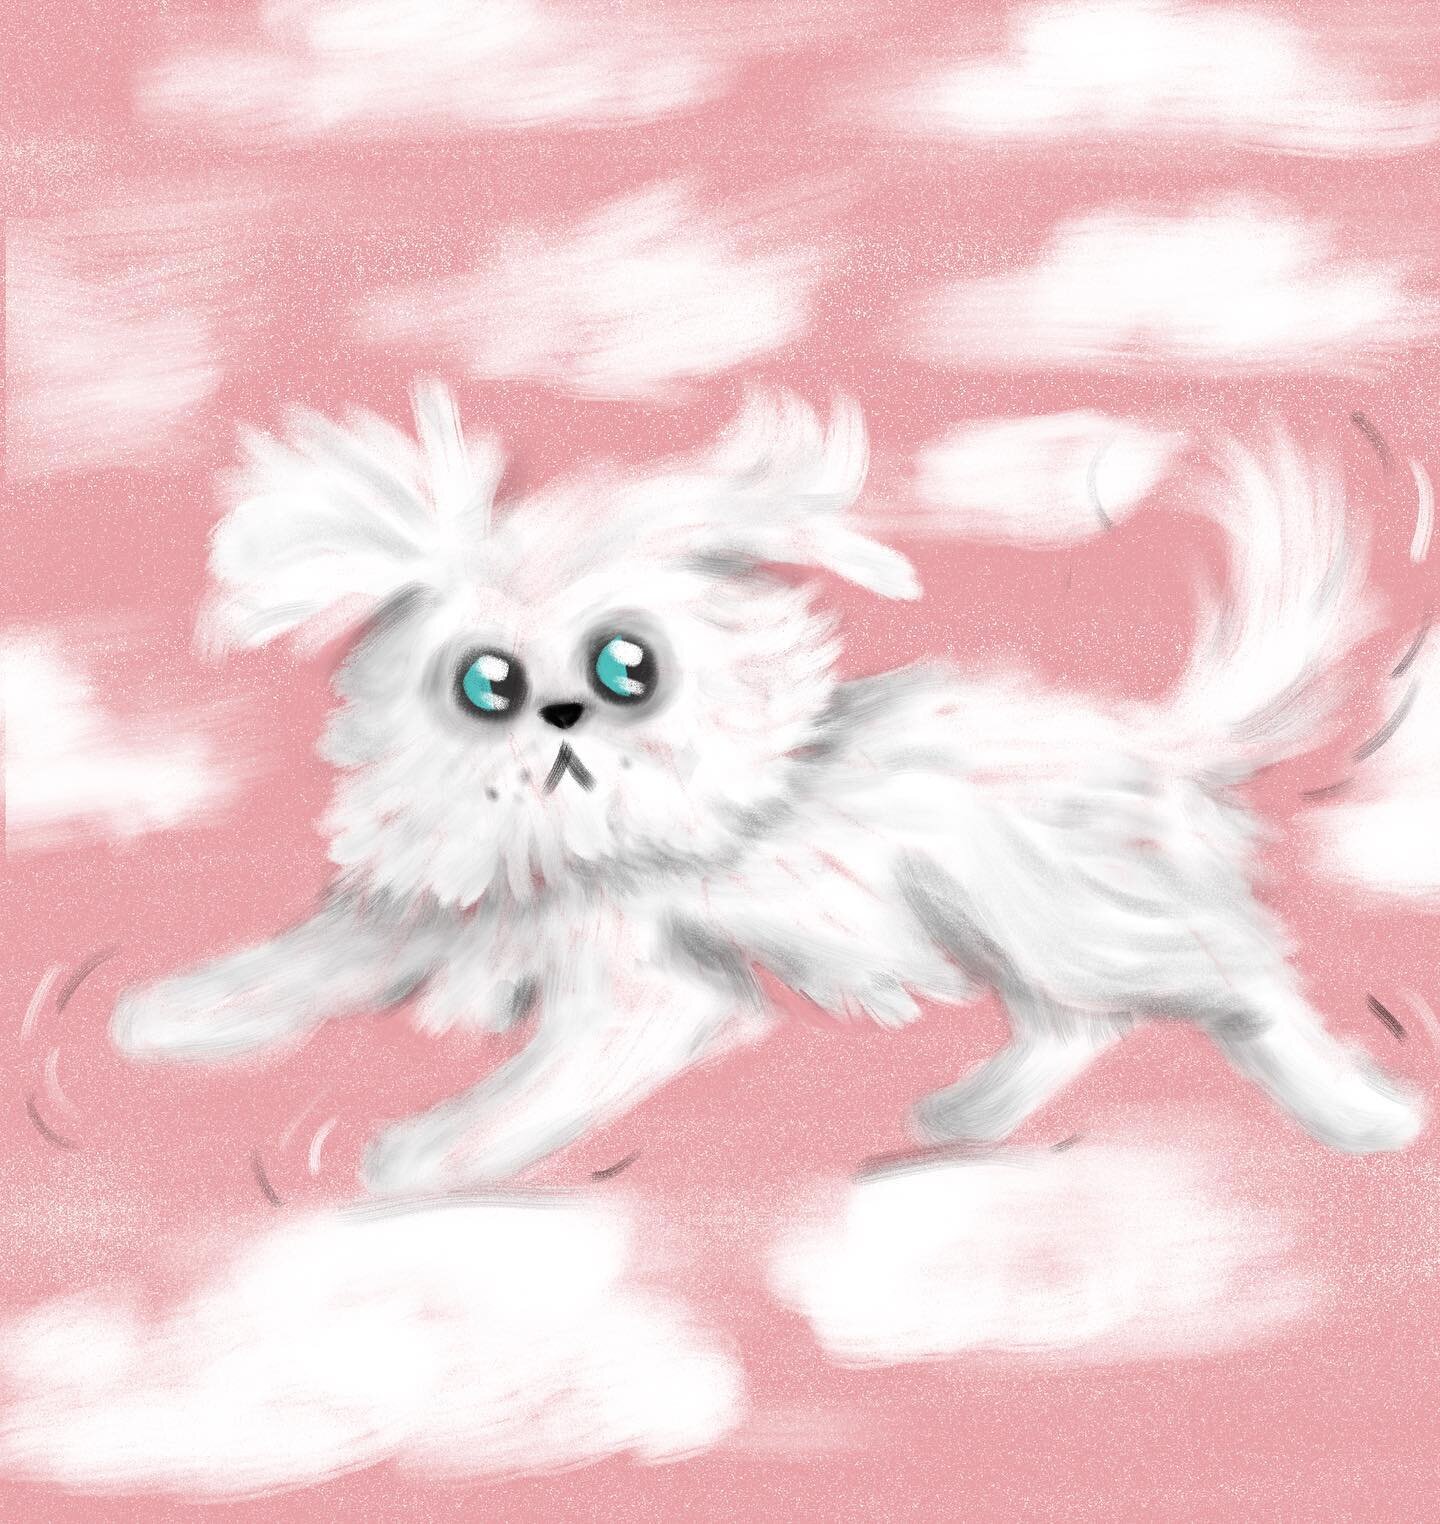 Lil Guy is running through the clouds